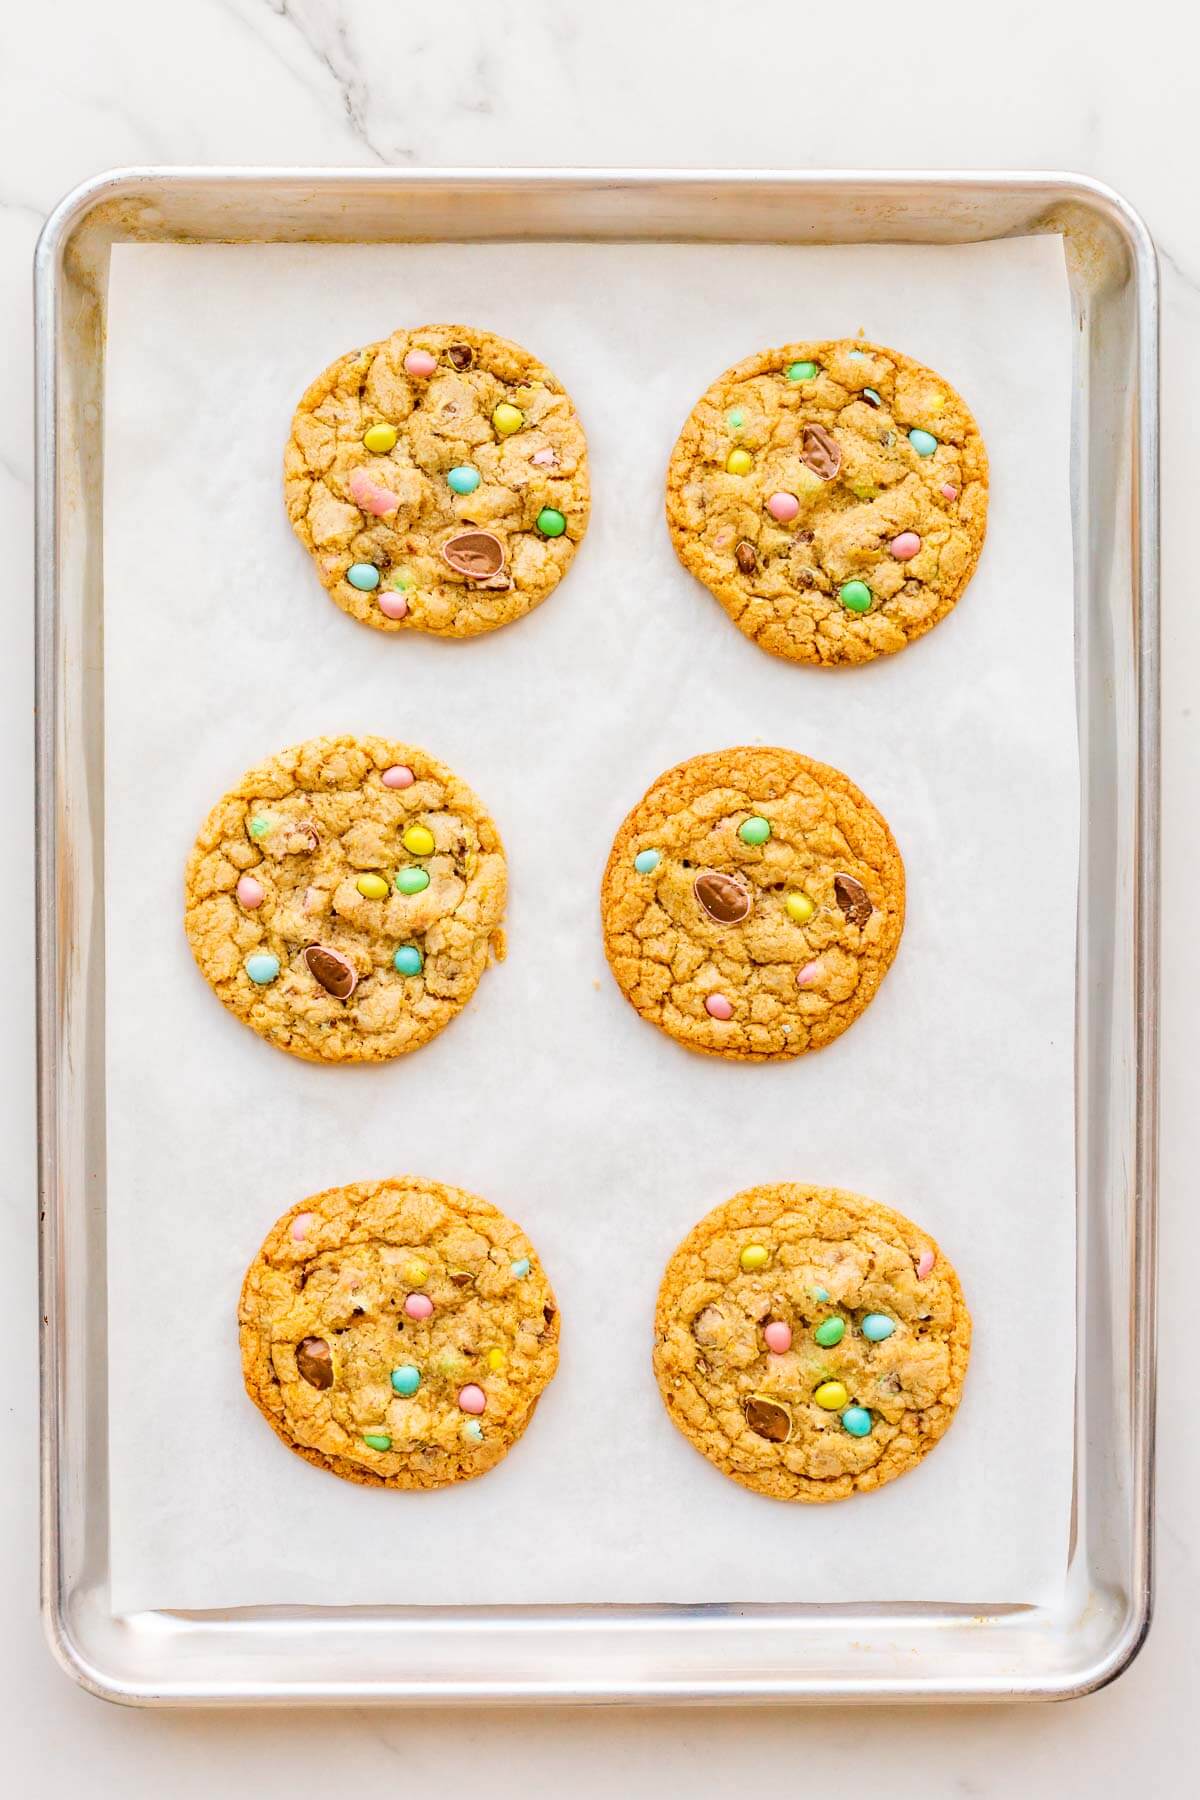 A parchment-lined sheet pan with 6 baked cookies topped with Mini Eggs.